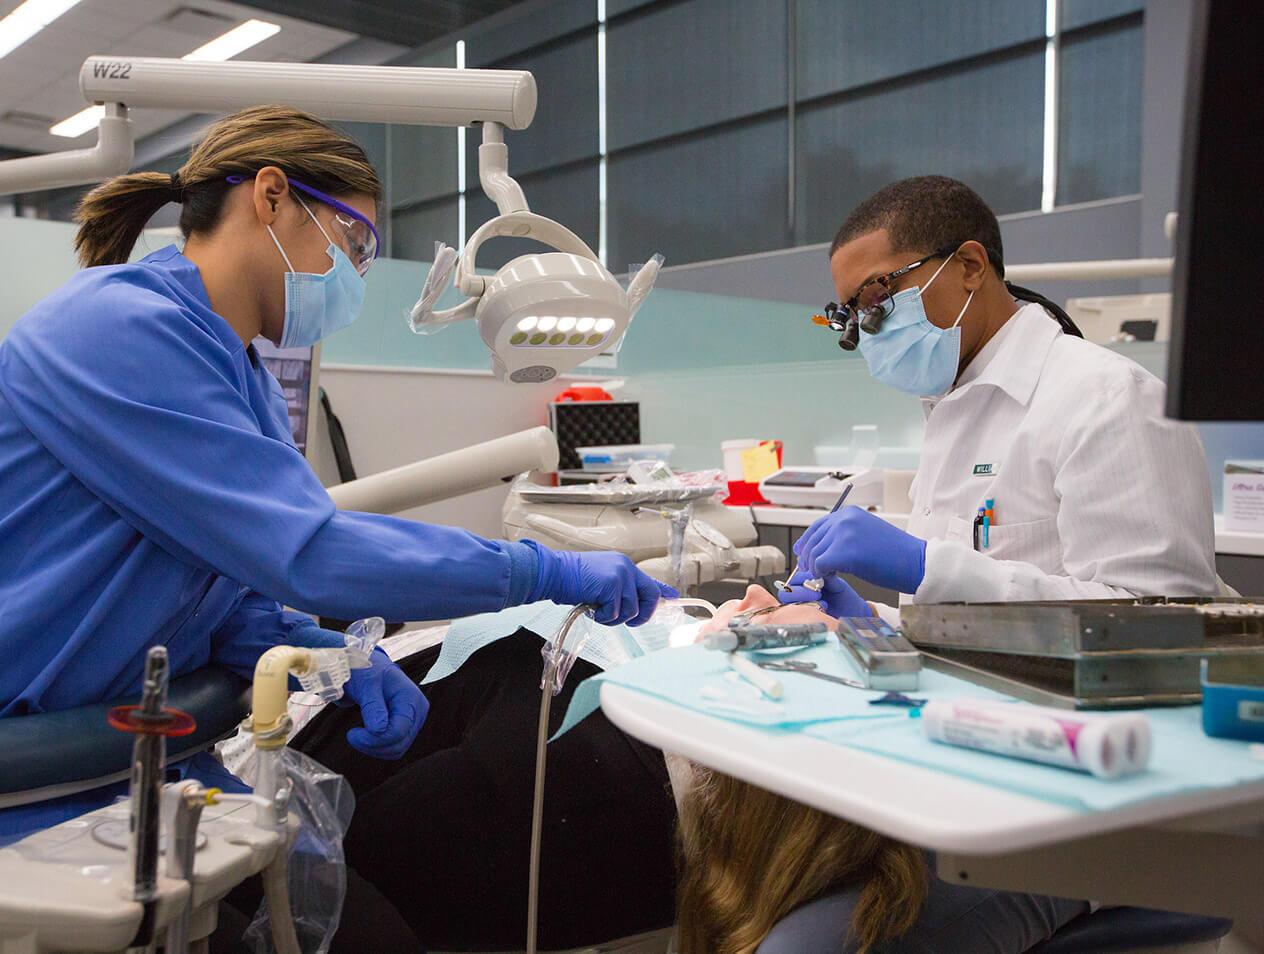 Dental students performing a dental procedure on a patient